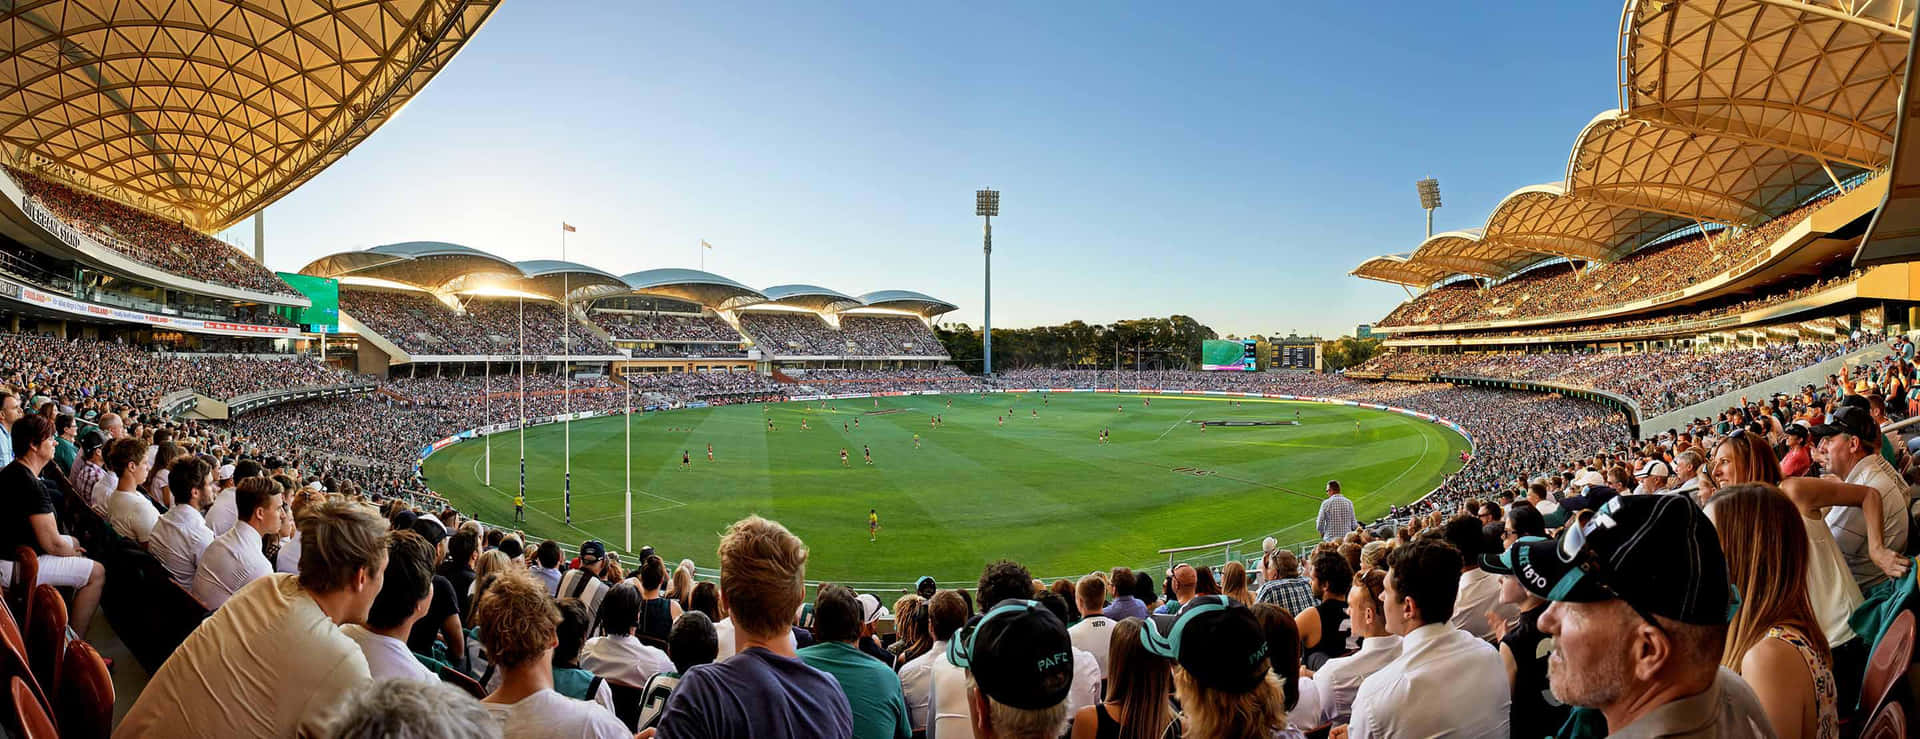 Adelaide Oval Cricket Match Panorama Wallpaper